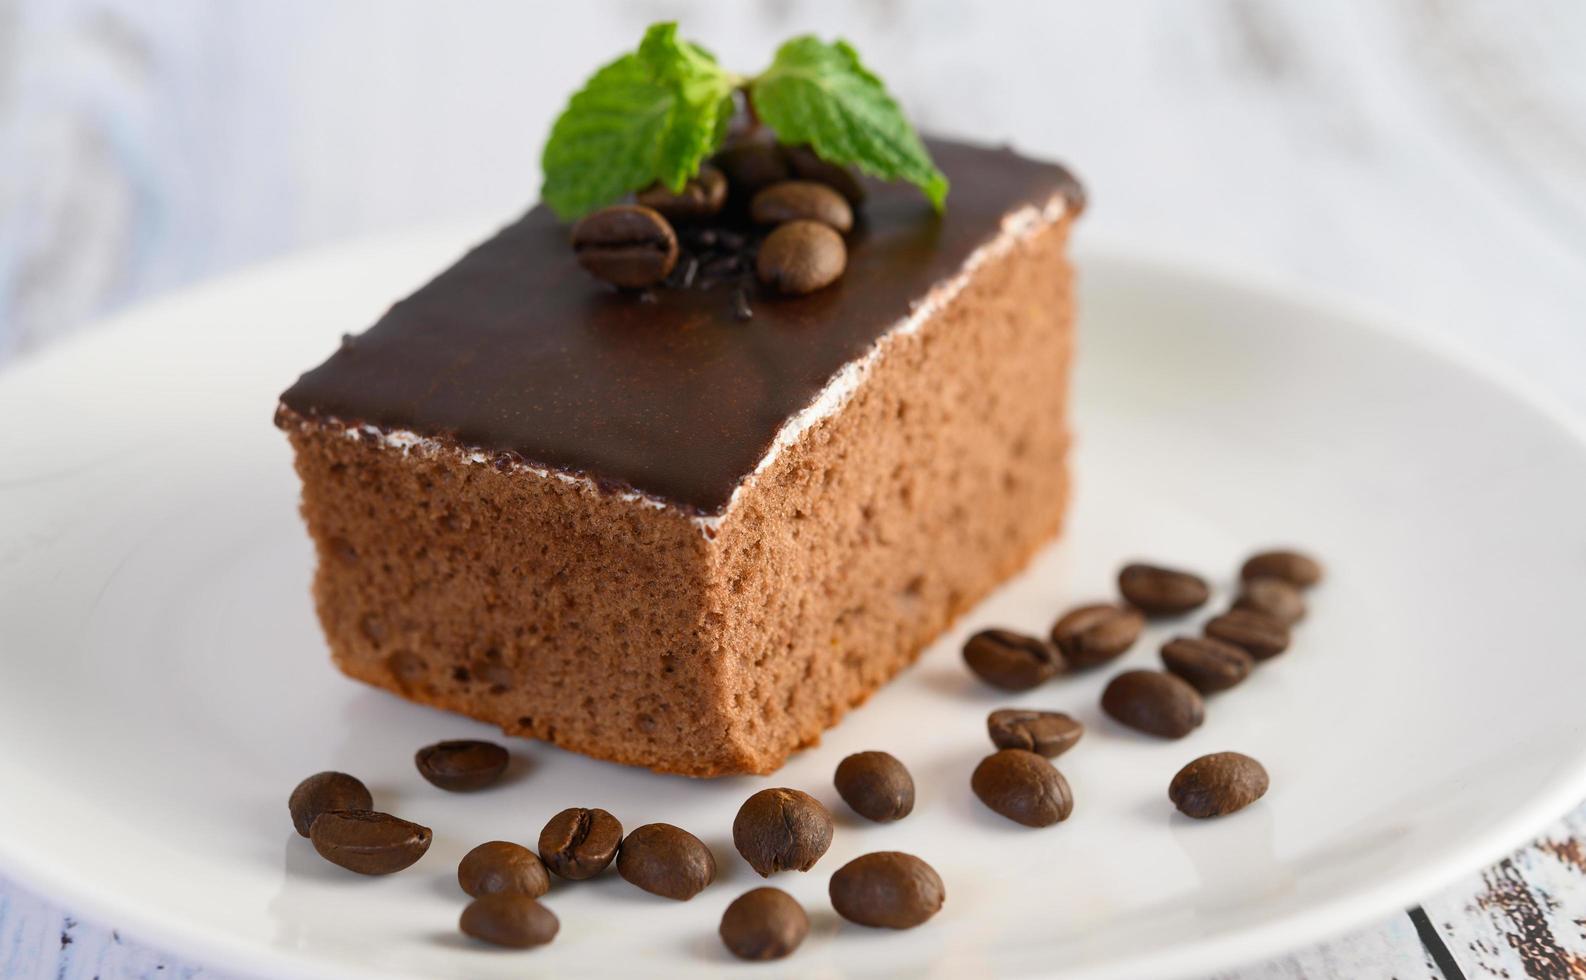 Chocolate cake with coffee beans on a wooden surface photo